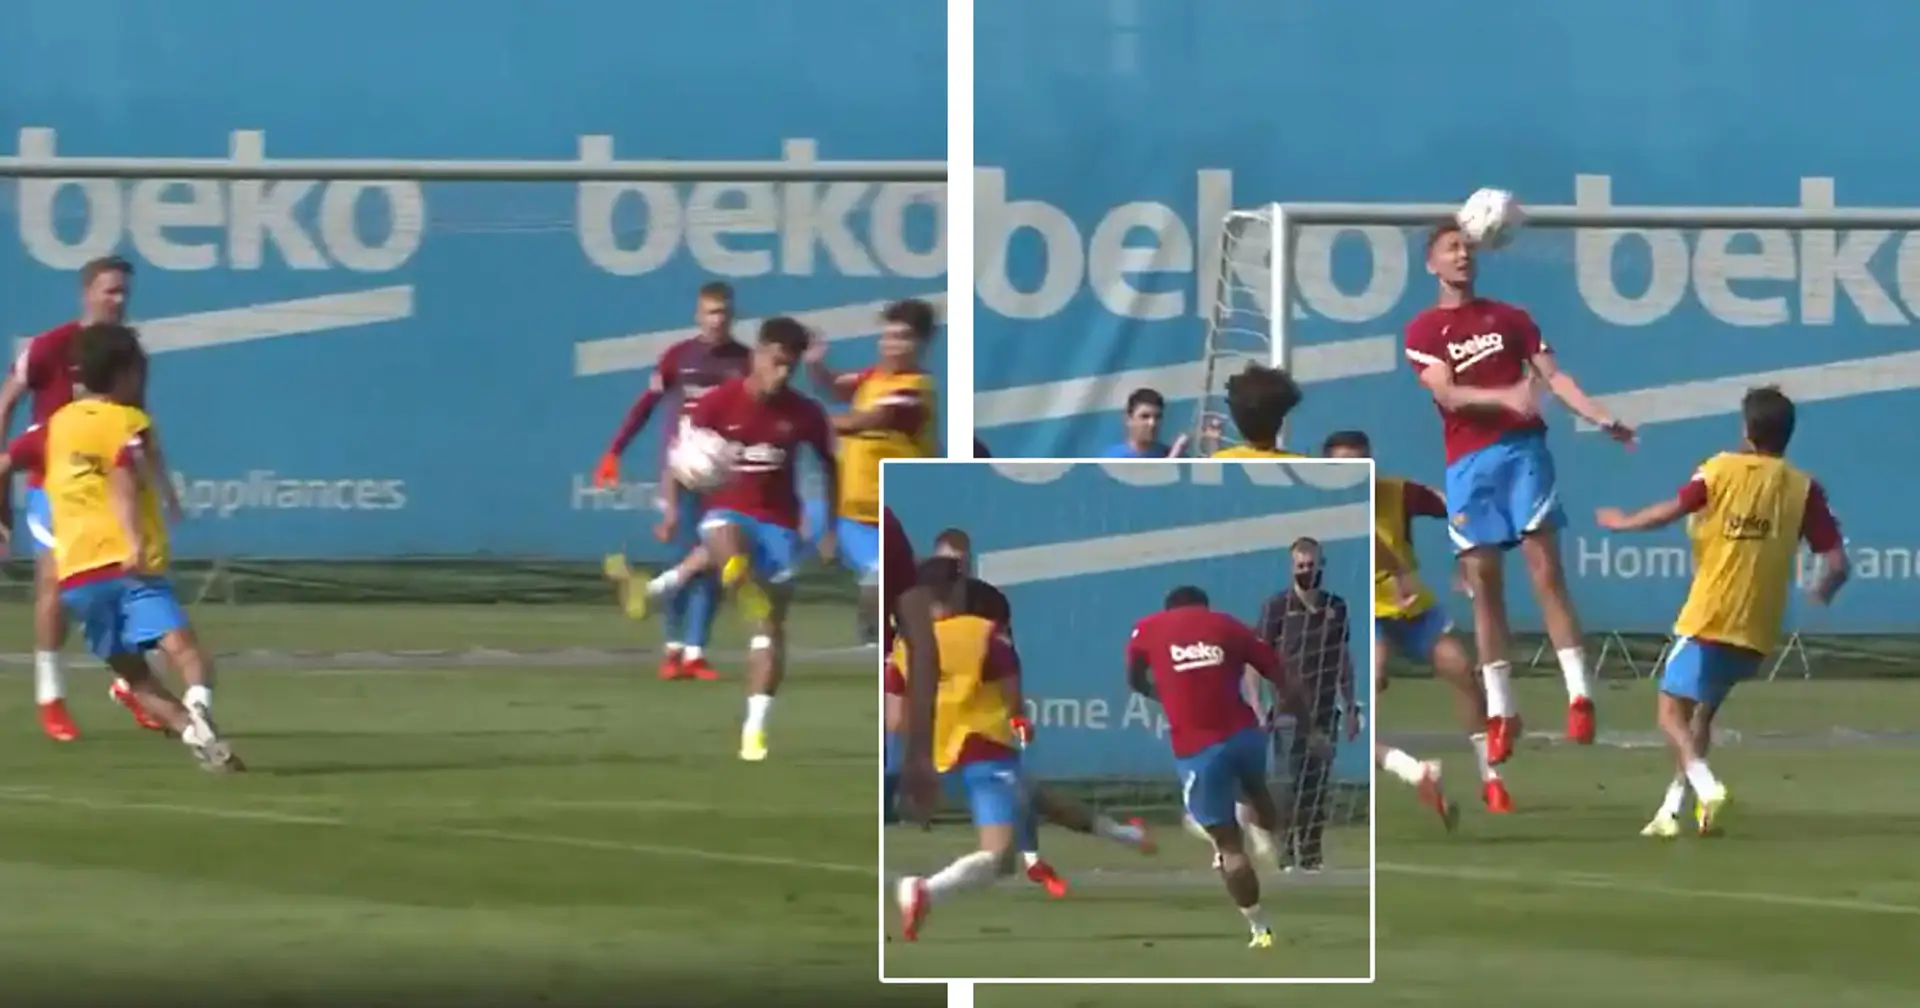 New top duo forming? Luuk de Jong and Coutinho link up for incredible goal in training (video)